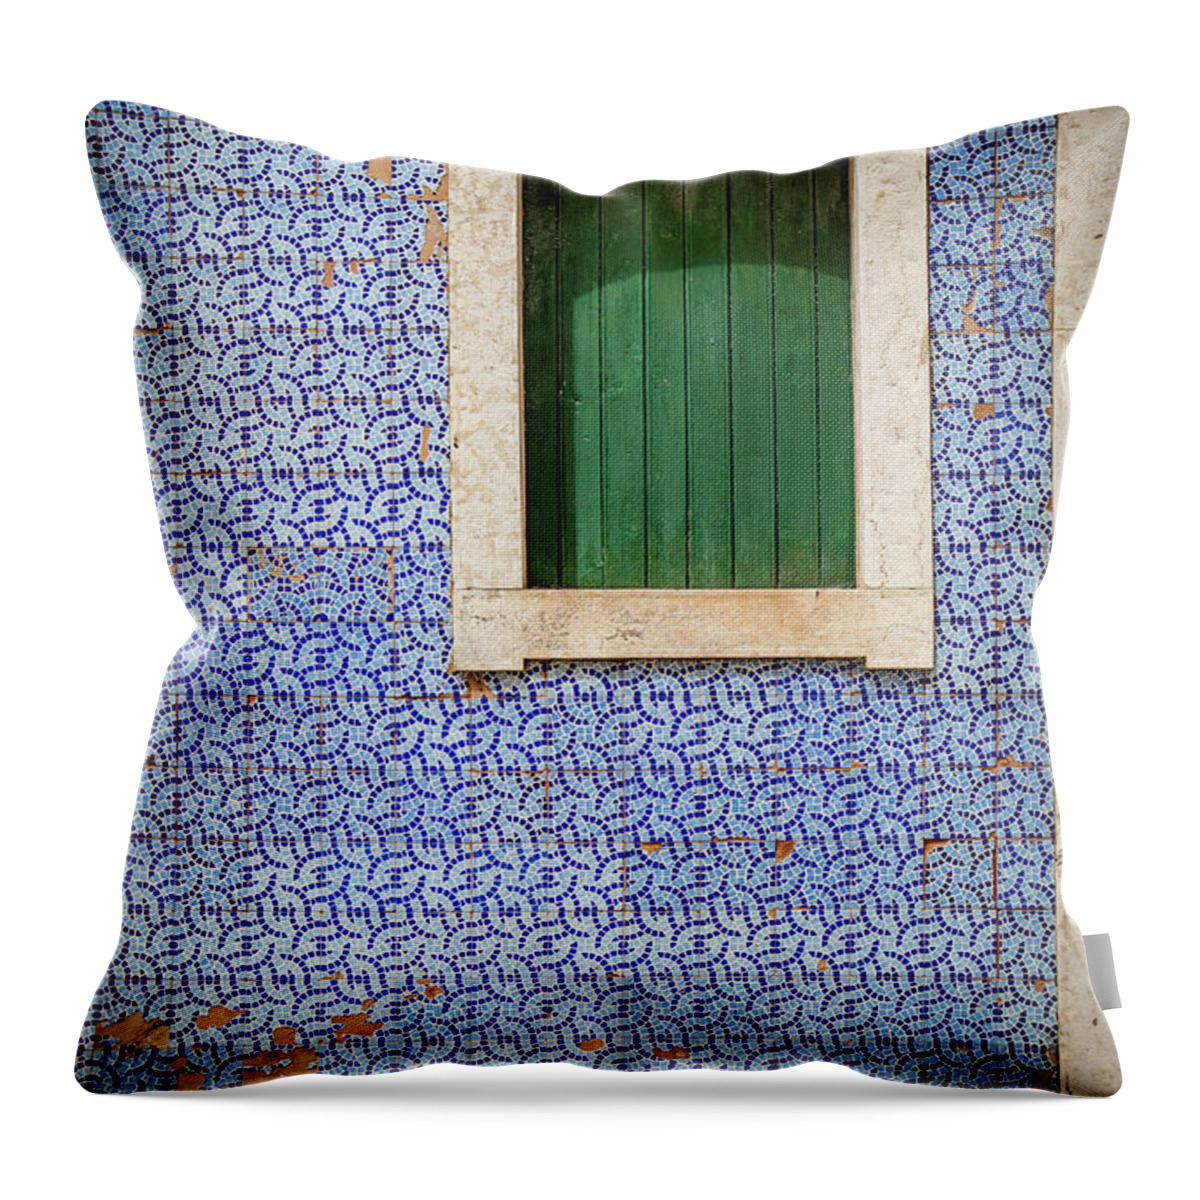 Faro Throw Pillow featuring the photograph Faro Blue Tiles by Nigel R Bell